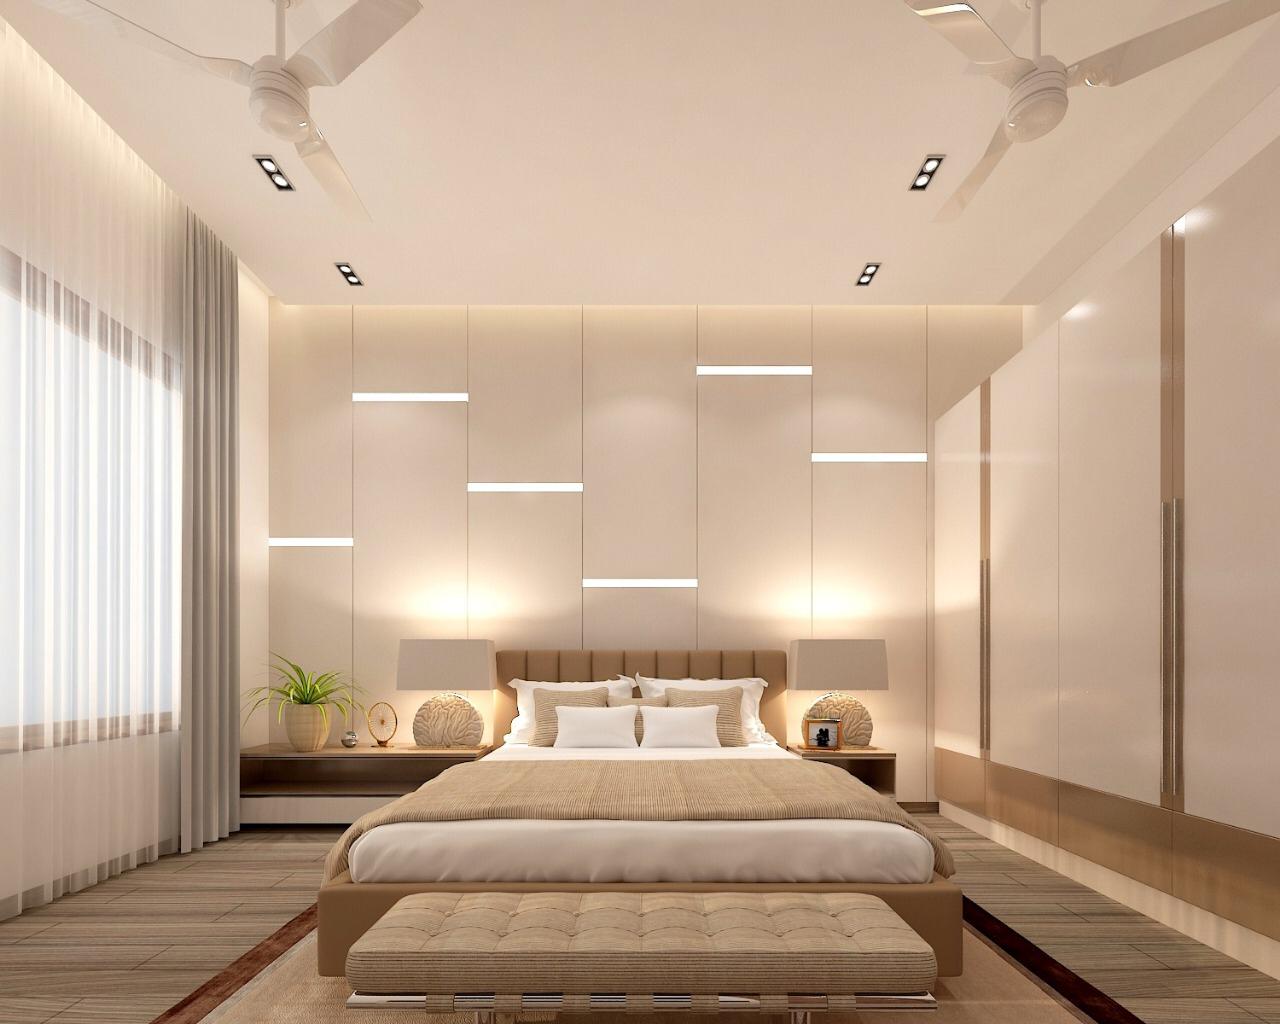 Bedroom With Wall Paneling And LED Stripe Light